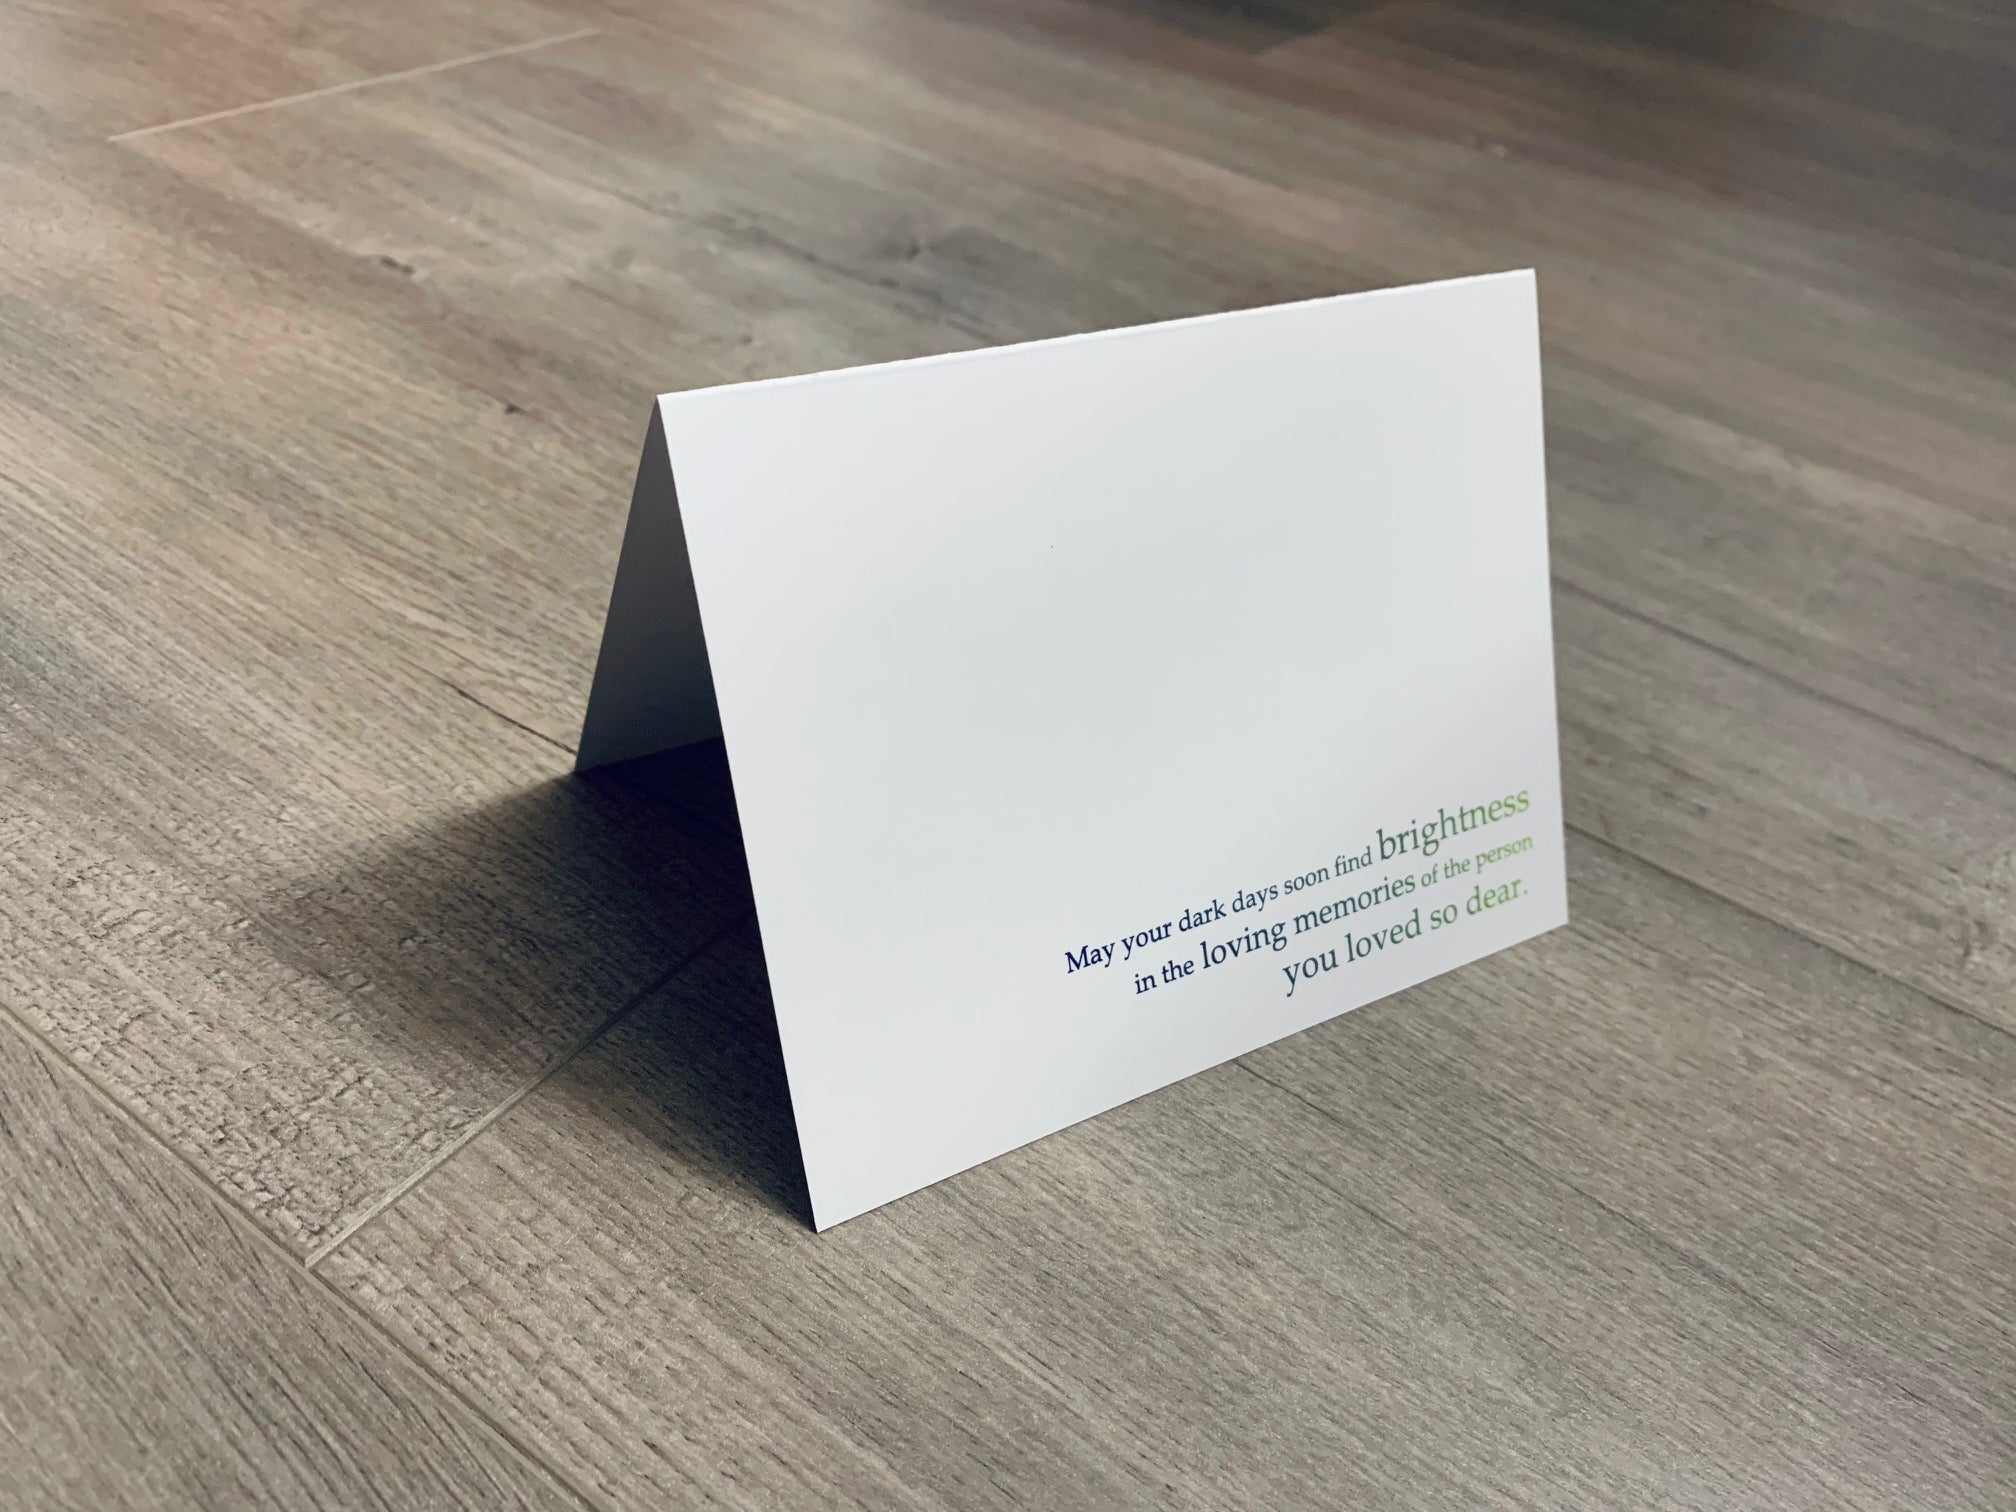 A white, folded sympathy card is folded and propped up on a gray wood floor. The card says, "May your dark days soon find brightness in the loving memories of the person you loved so dear." The printing color fades from navy to green. From the In Sympathy collection by Stationare.